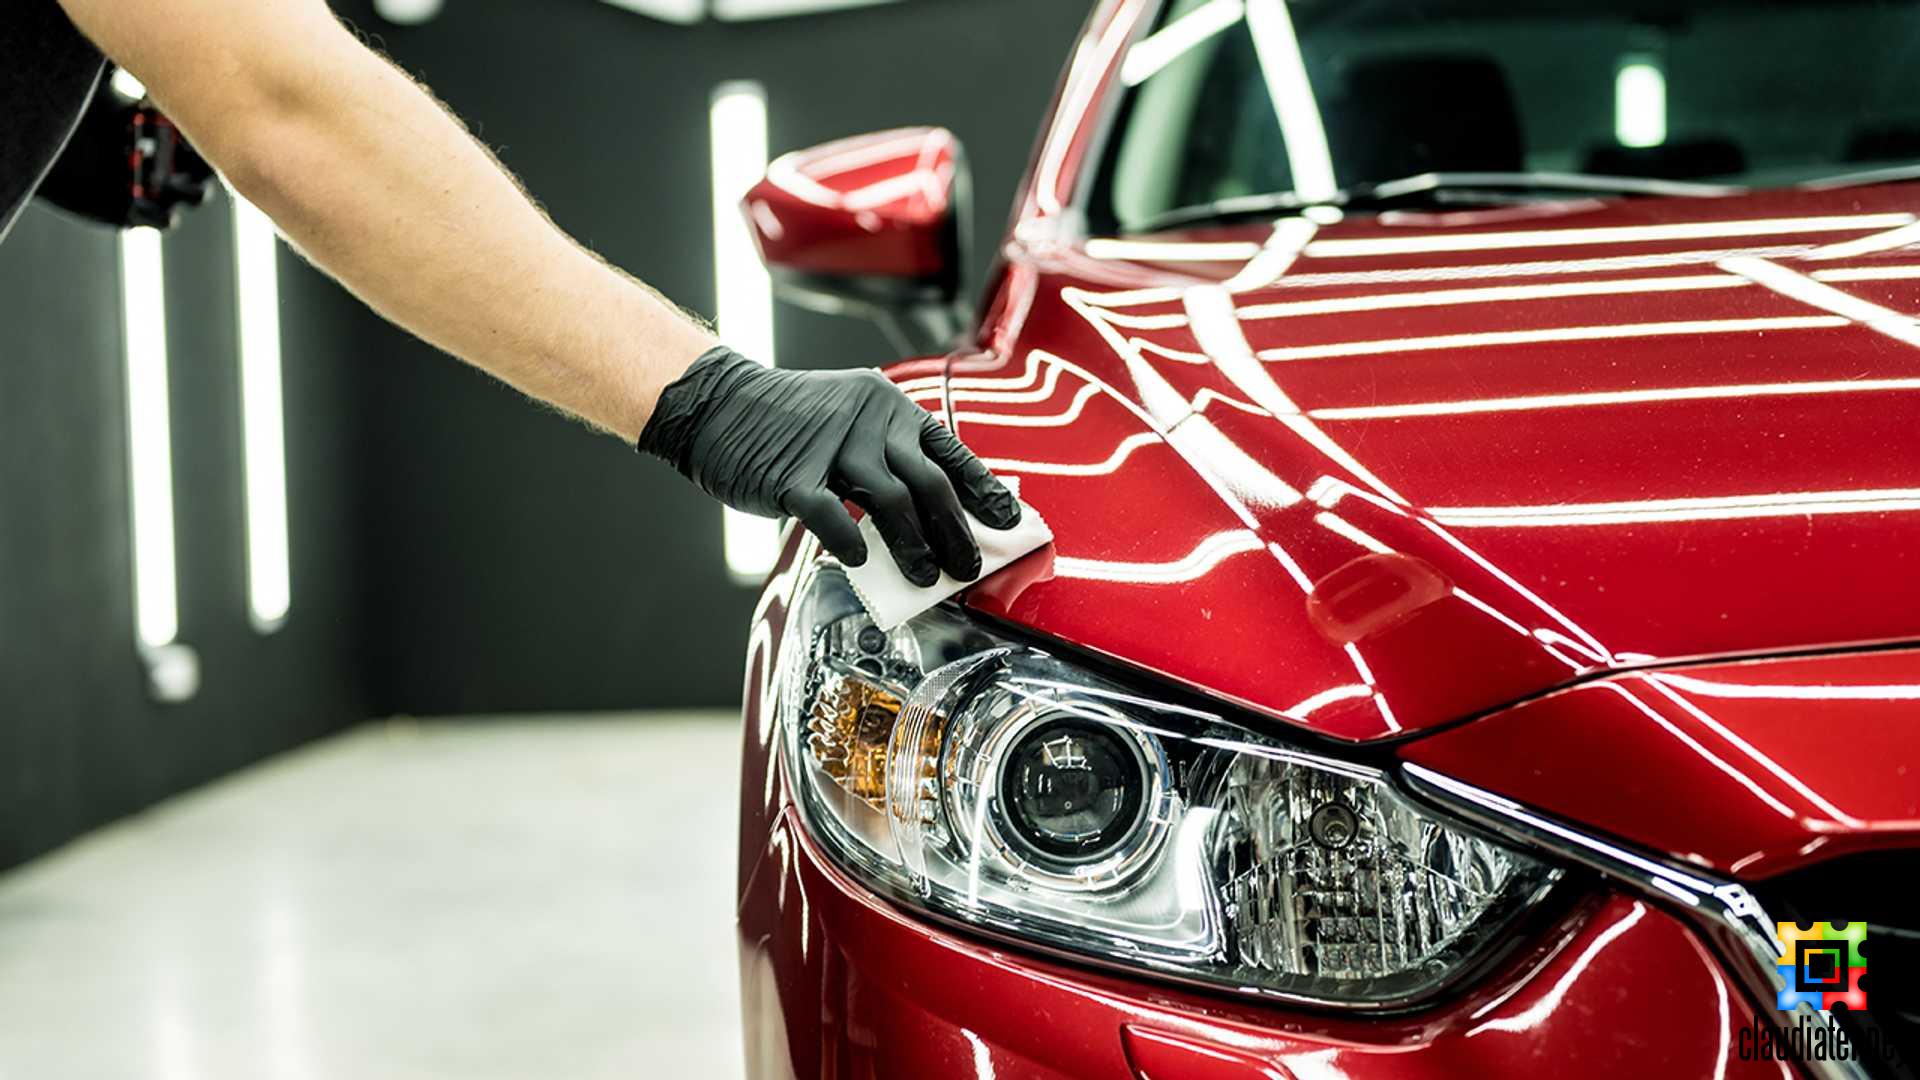 Benefits of Ceramic Coating for Your Car